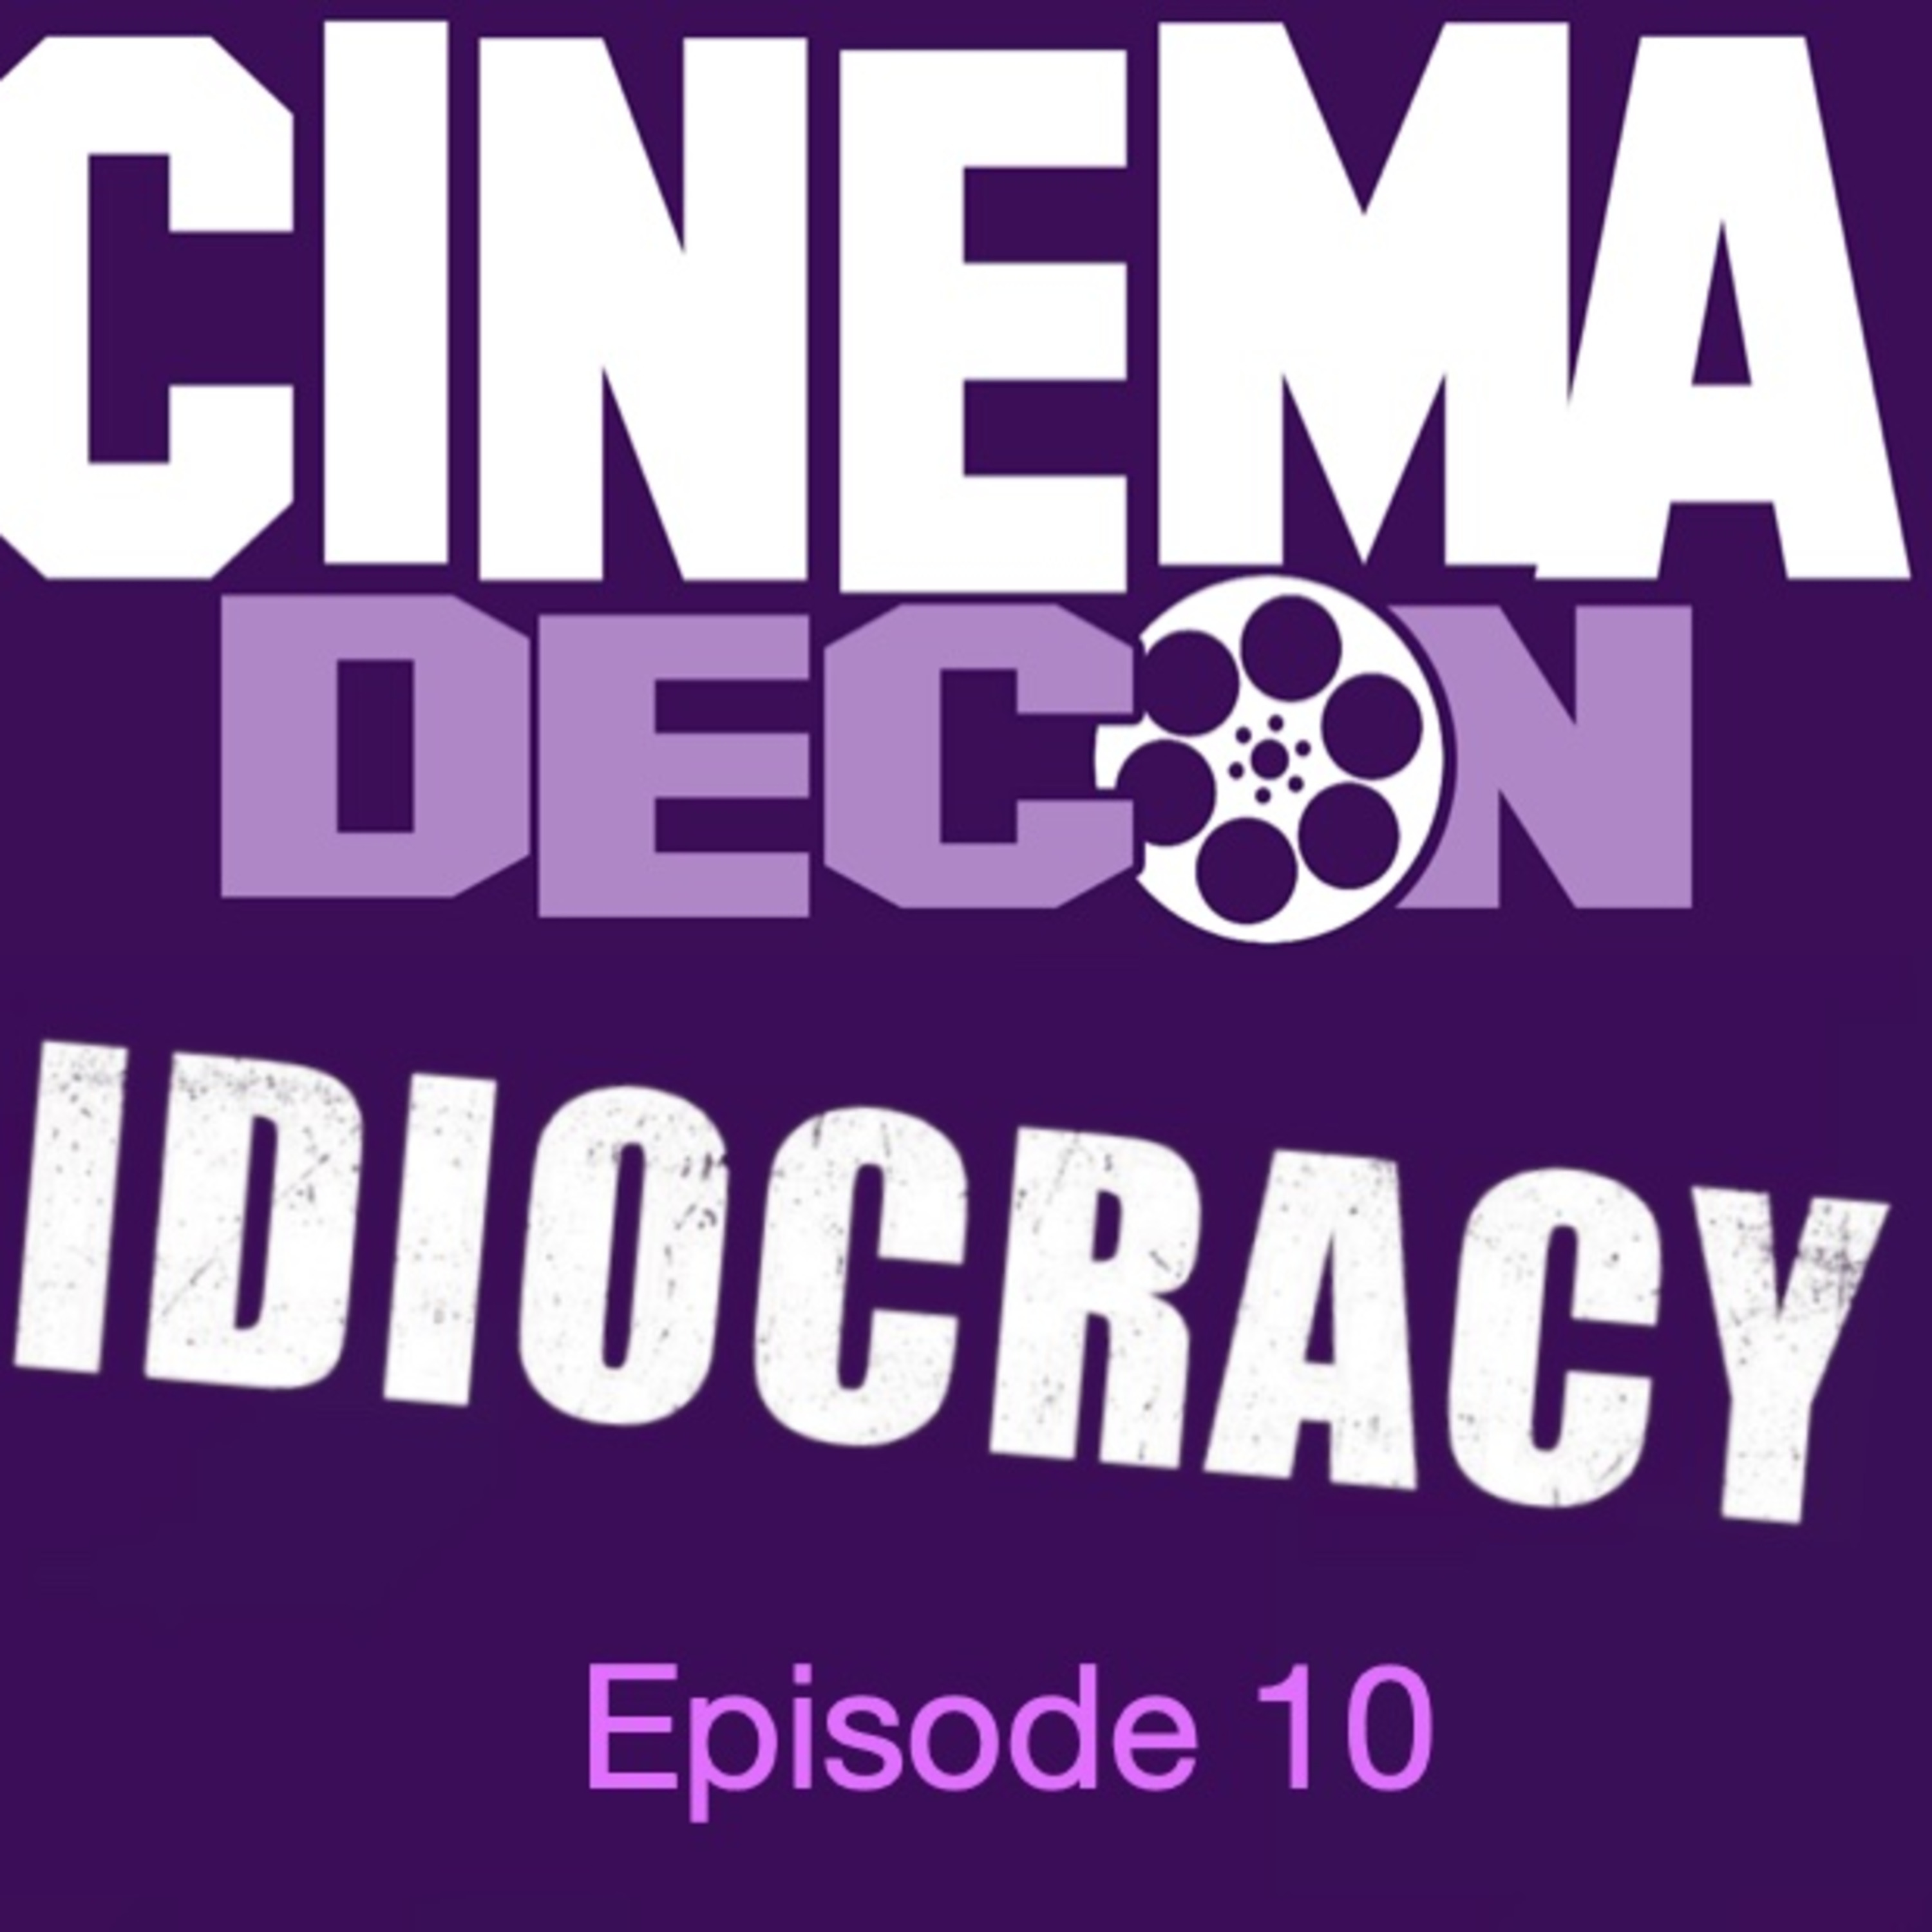 Episode 10: Idiocracy (2006) - Movie Review and Analysis